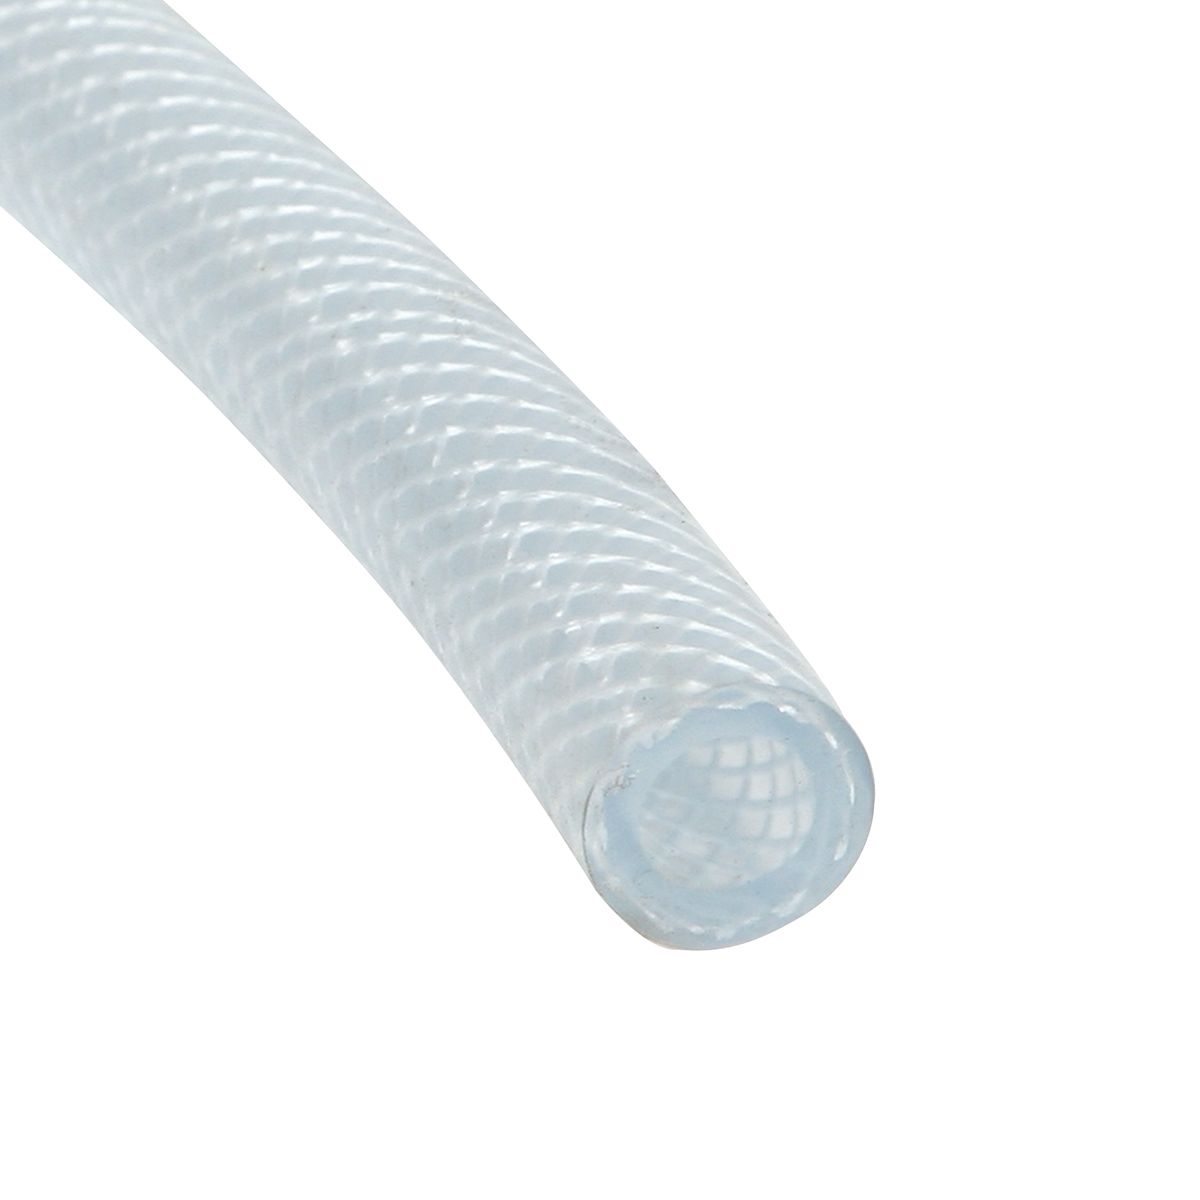 51mm or 2" Clear Flexible PVC Tube Reinforced Pipe Water Pond Braided Air Hose 